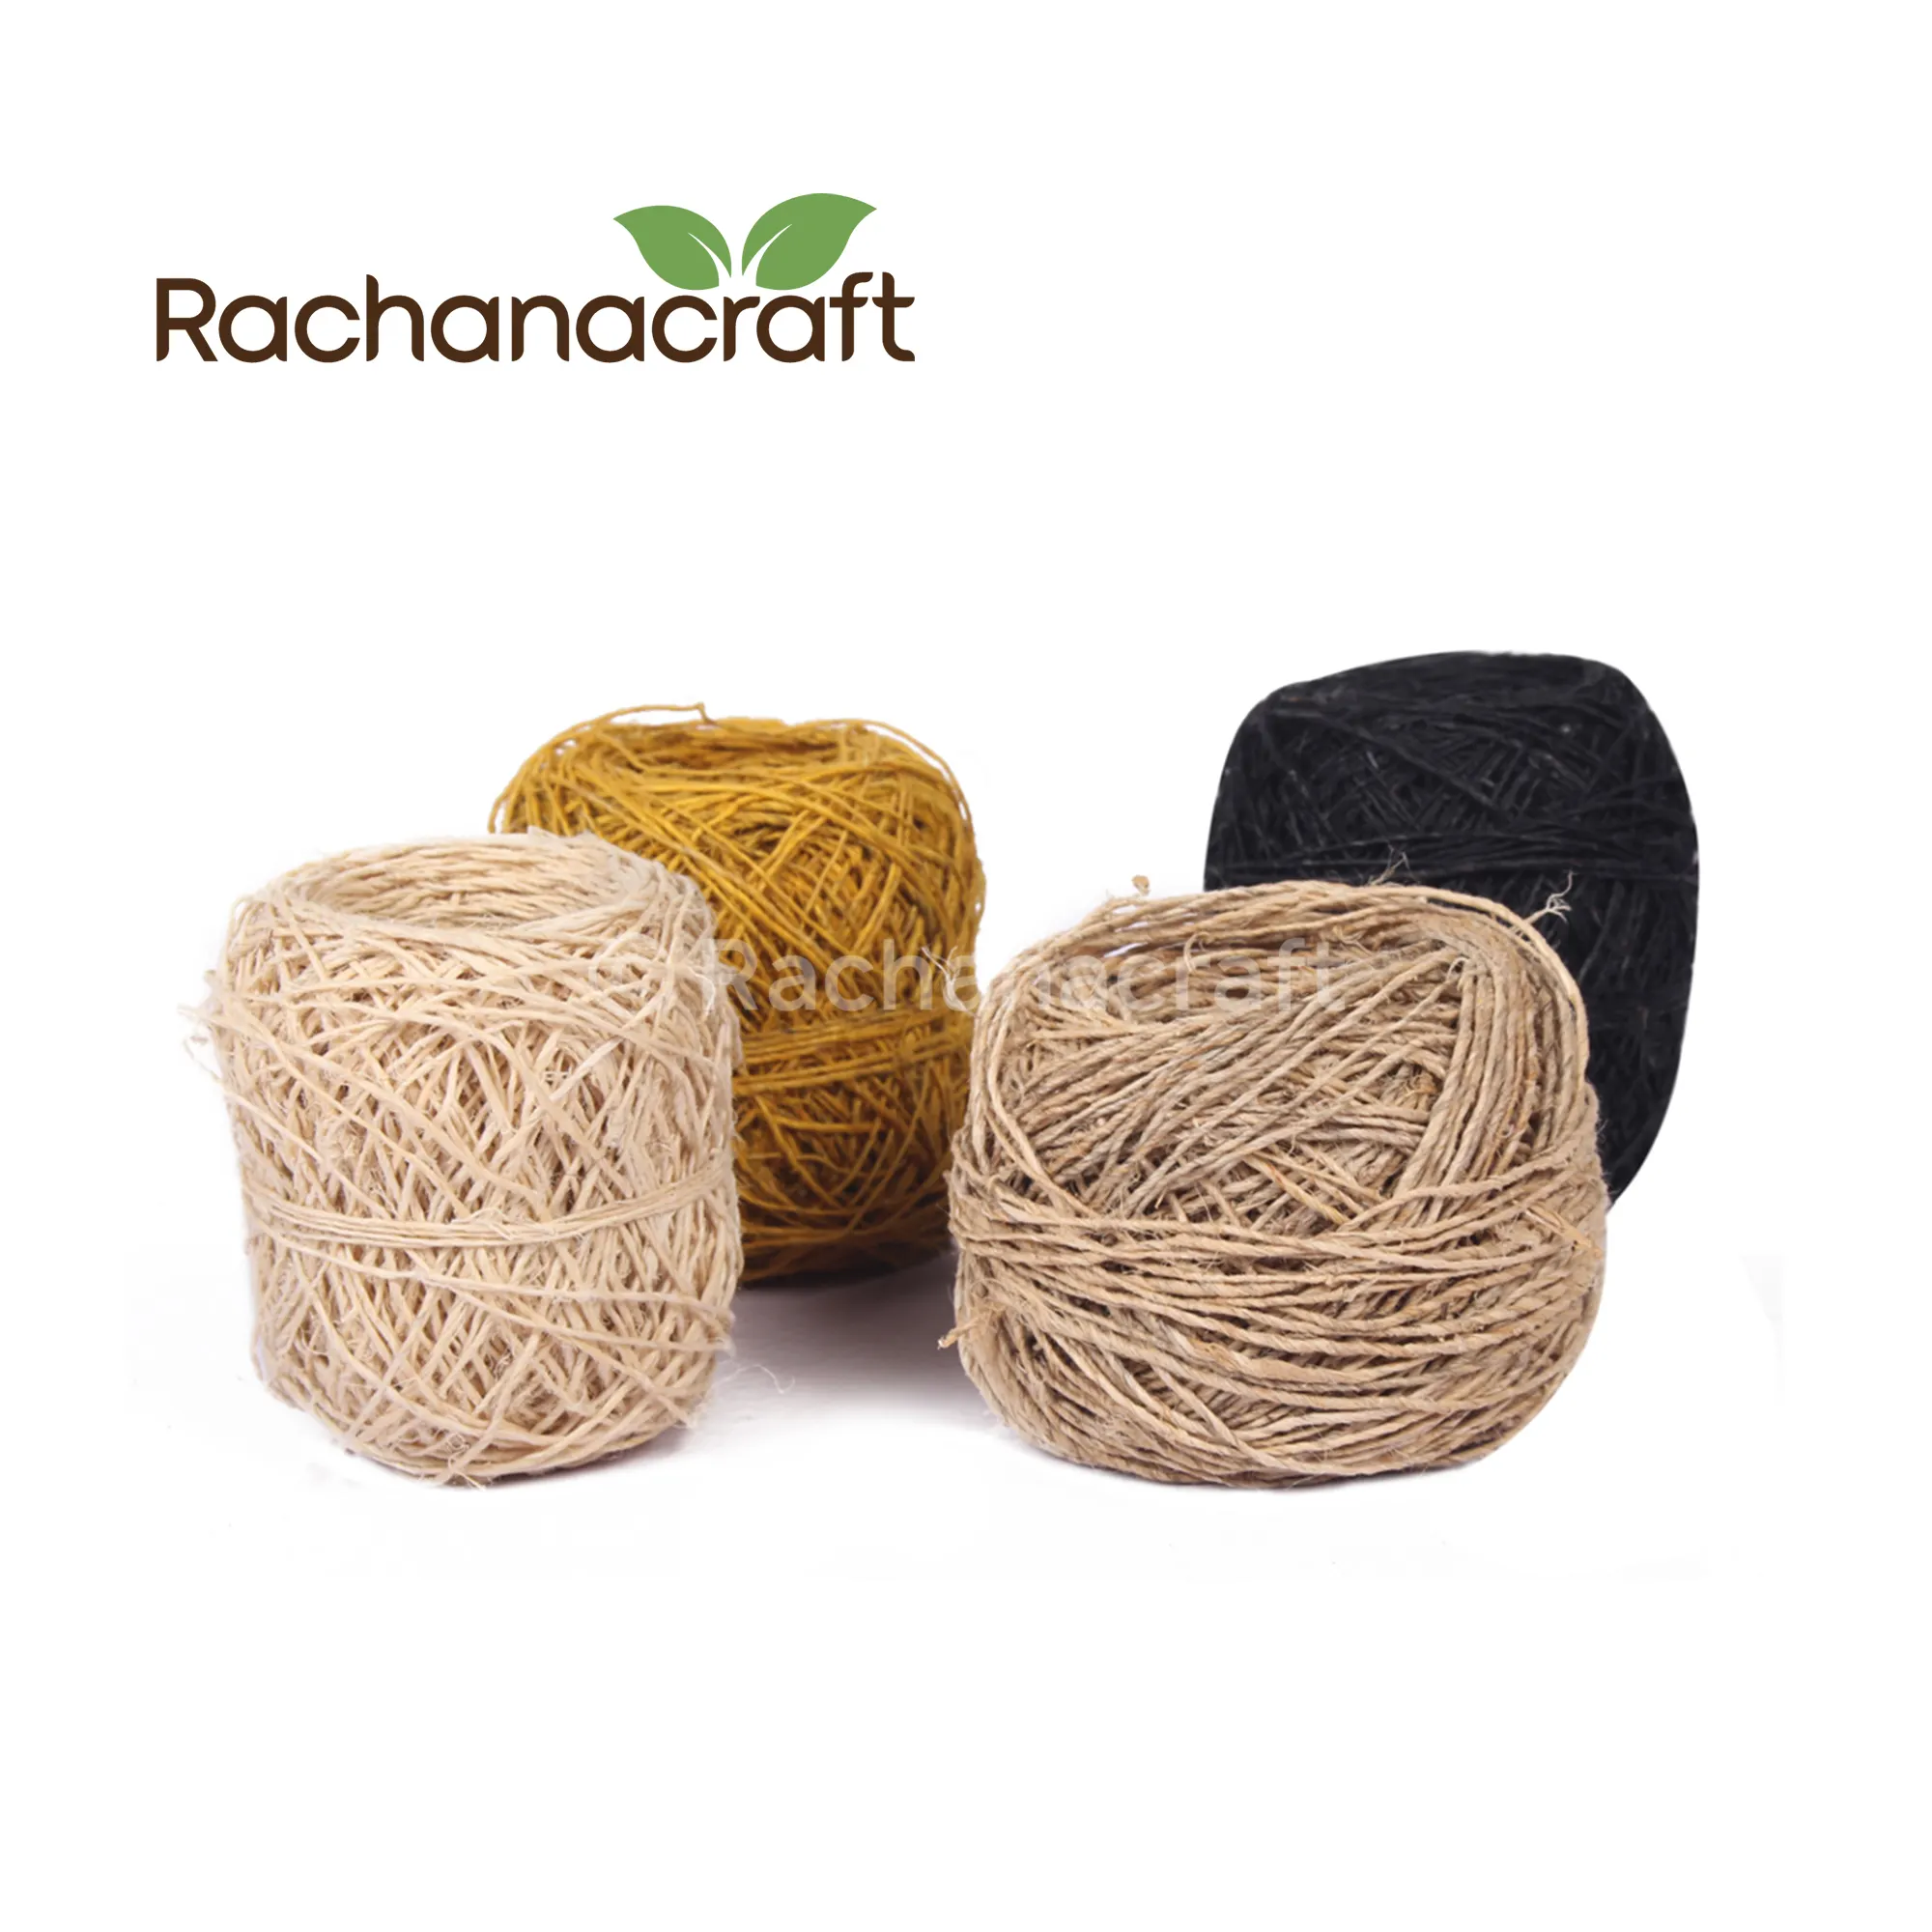 100% Organic Natural Hemp Cord Handmade in Nepal for DIY Craft Home Gard Wholesale Supplies Factory Outlet from Nepal